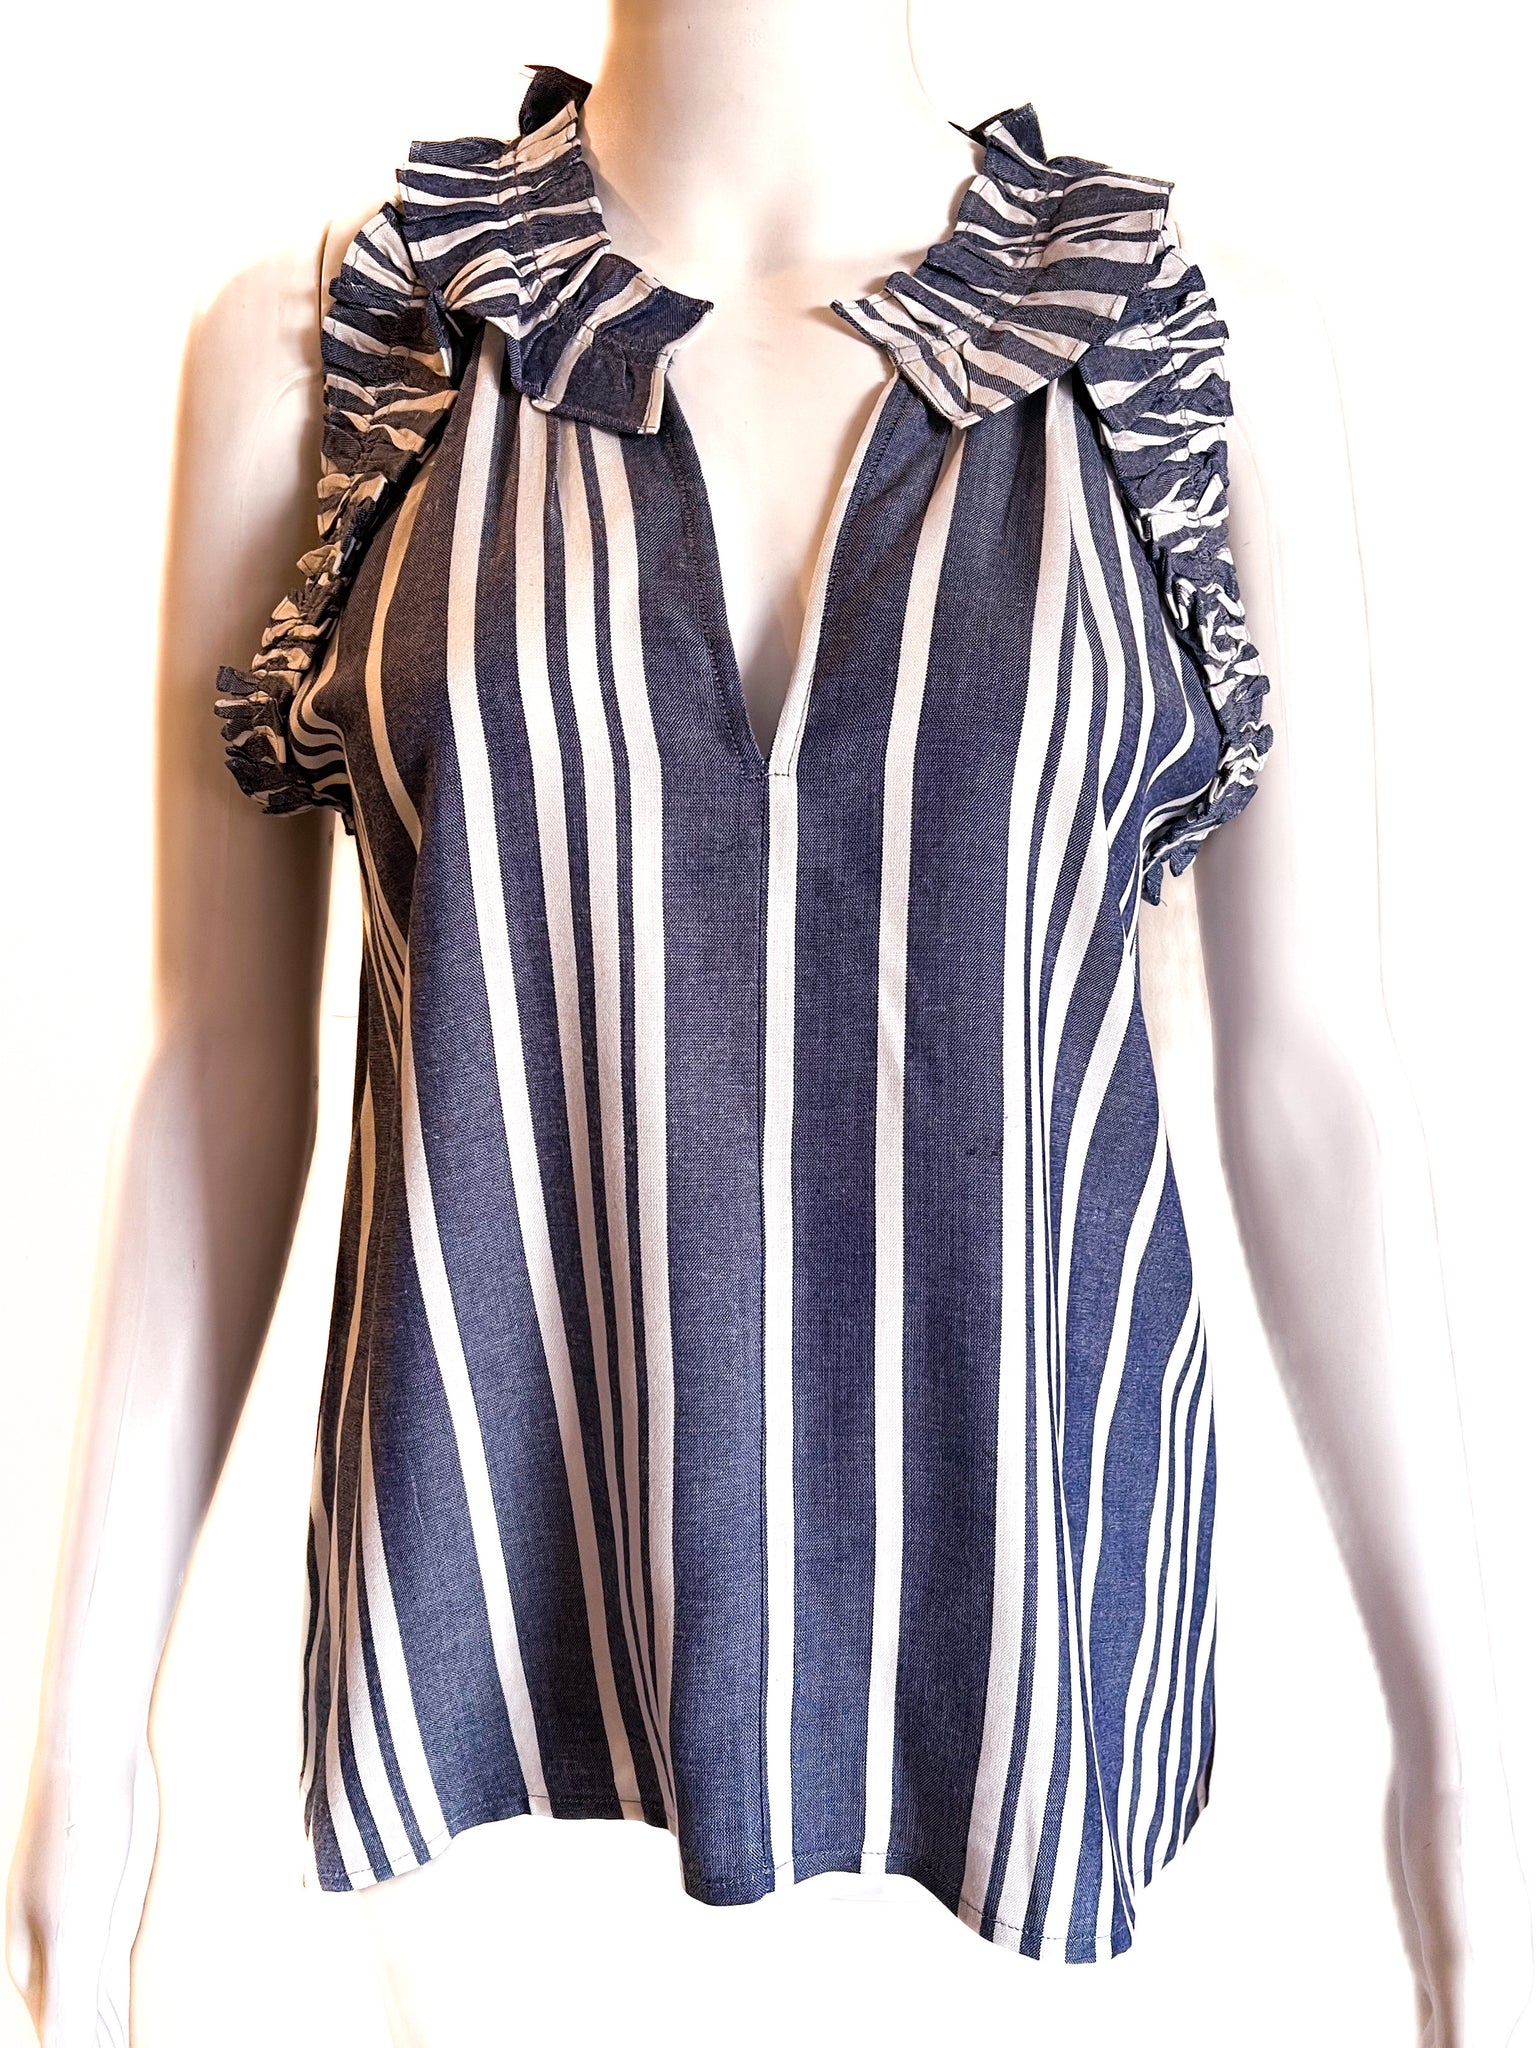 Butterfly Ruffle Top- Woven Stripes- Navy/White